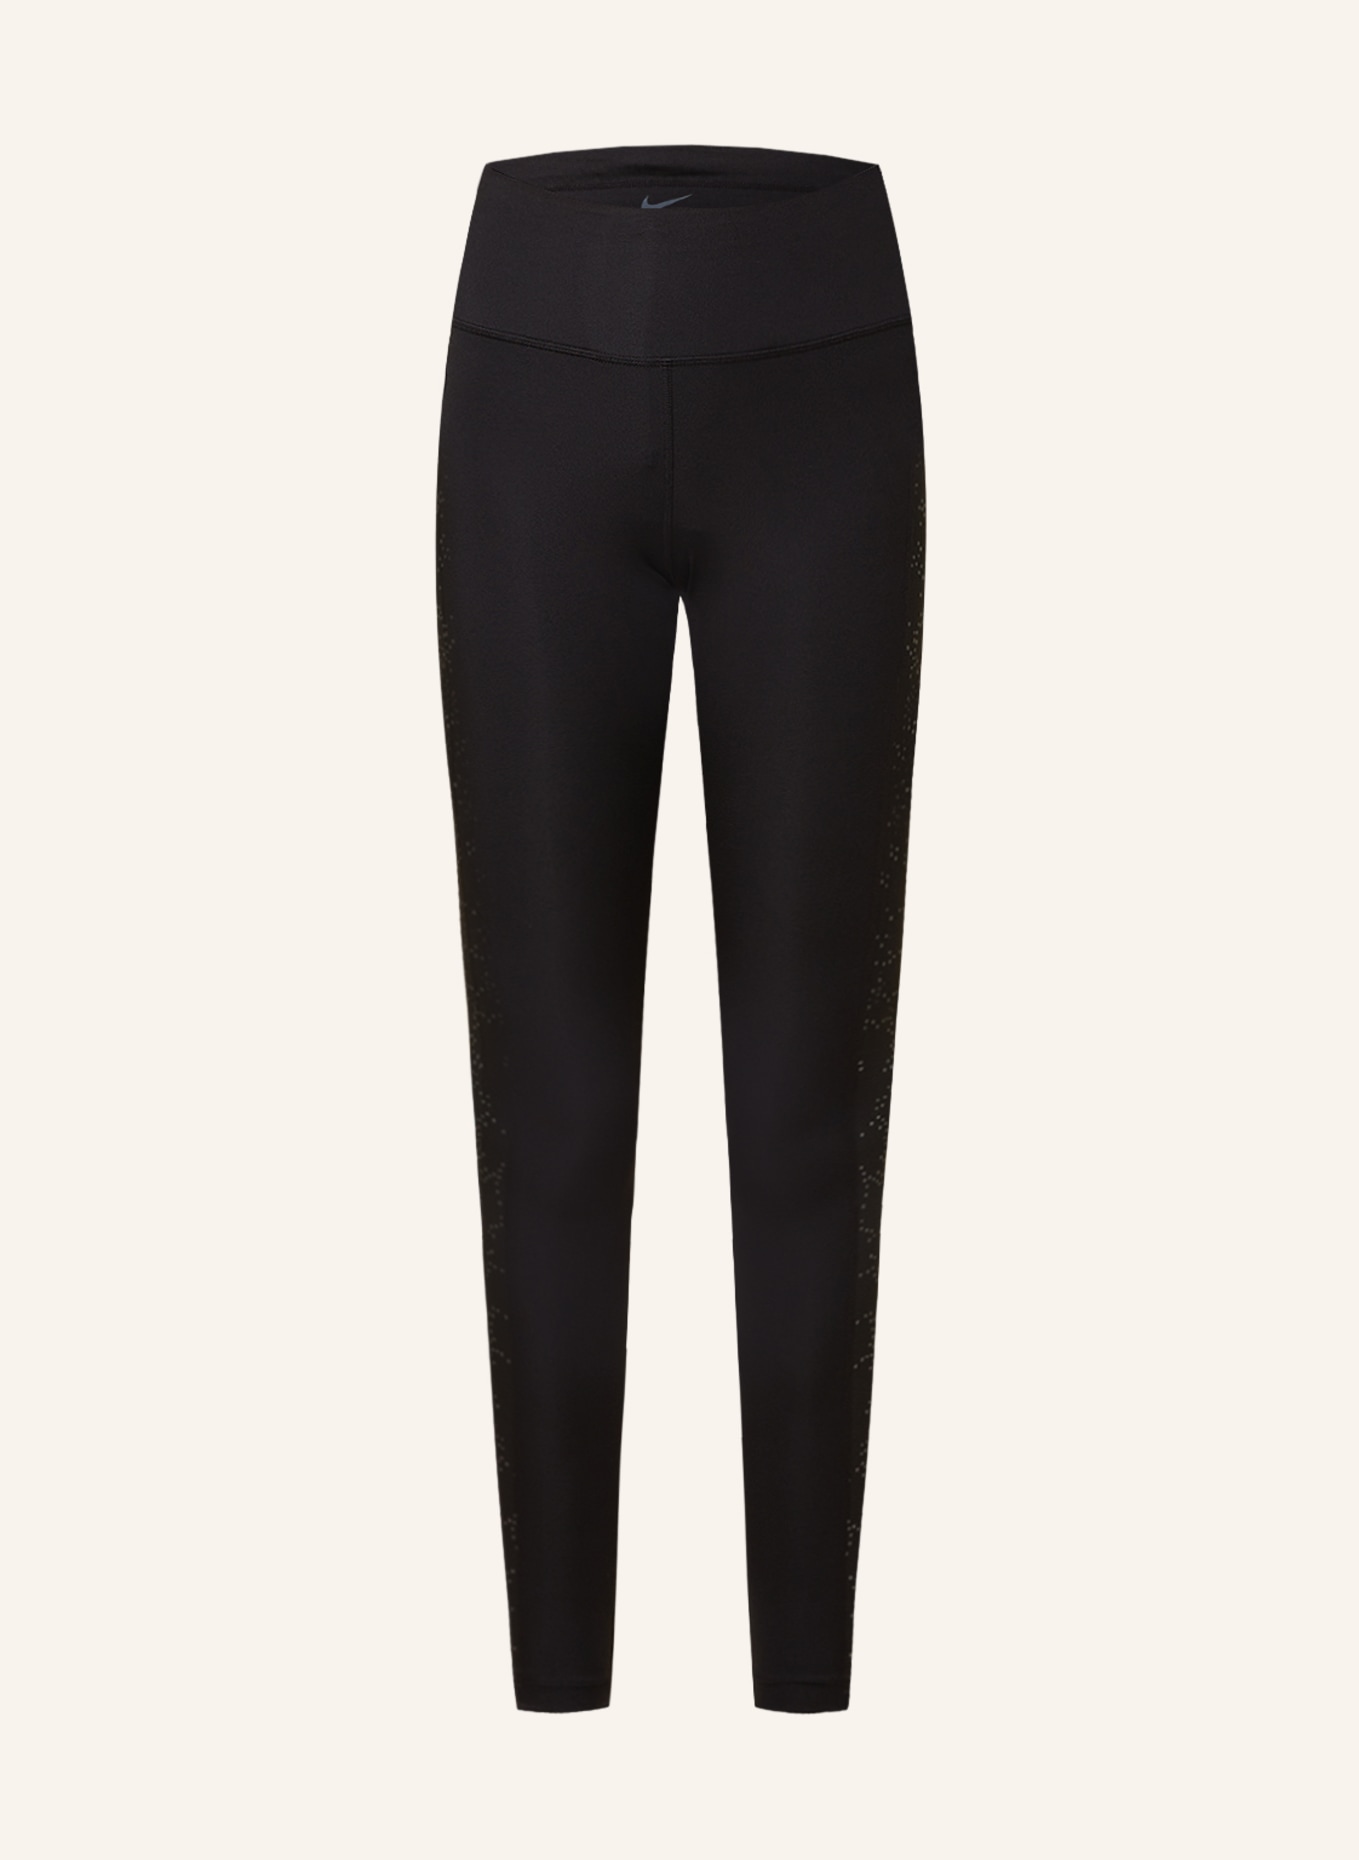 Nike Running tights FAST in black